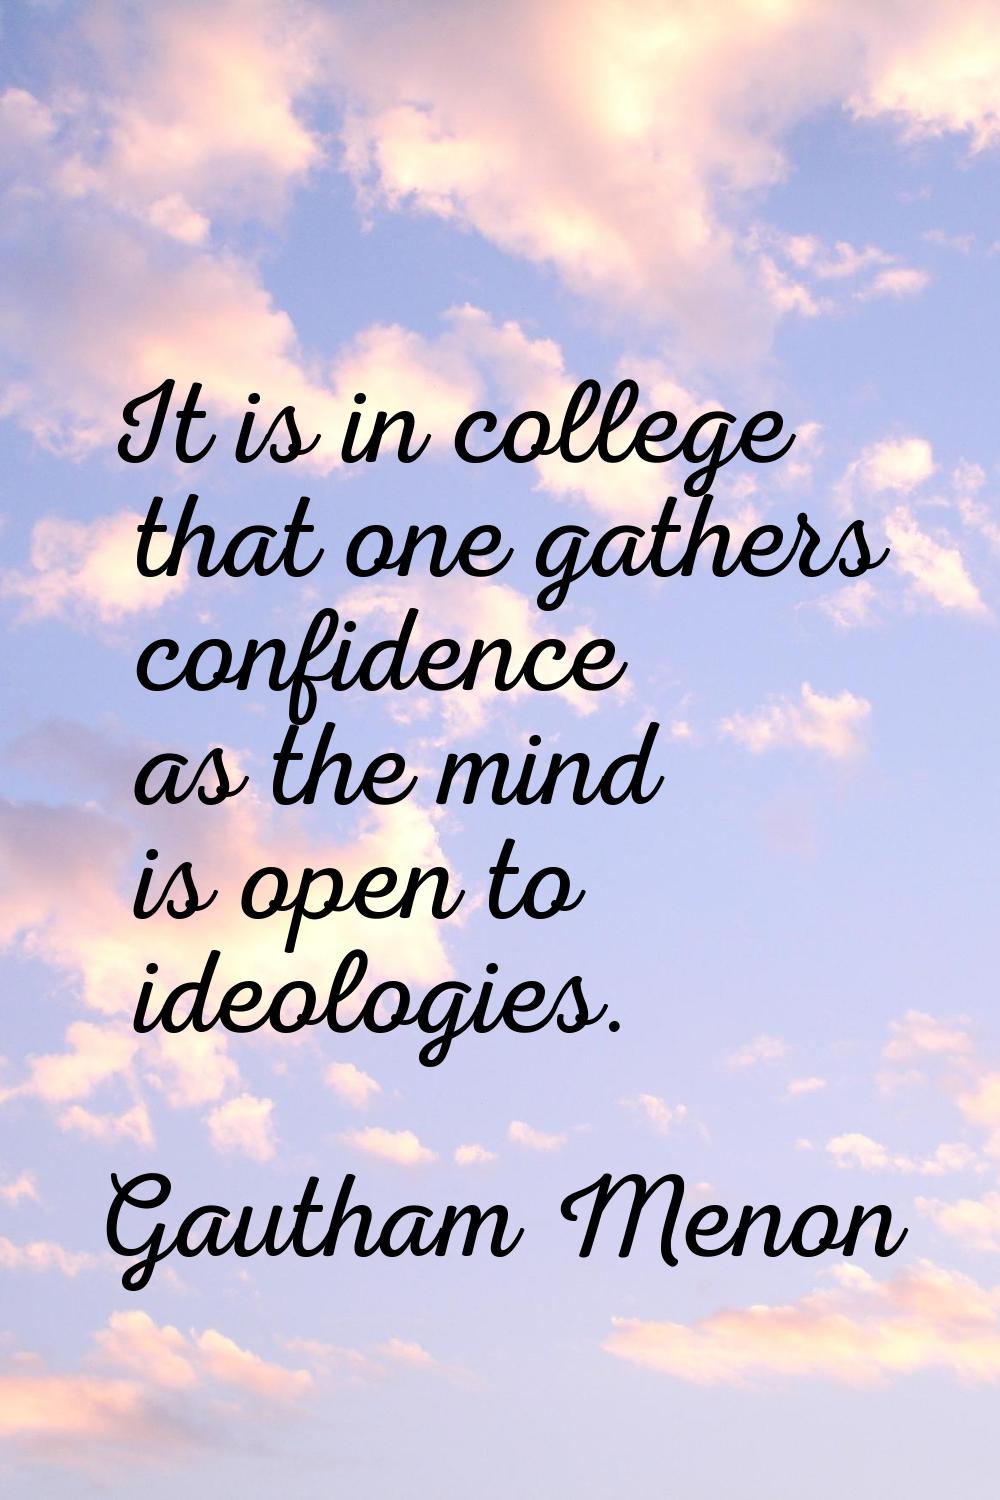 It is in college that one gathers confidence as the mind is open to ideologies.